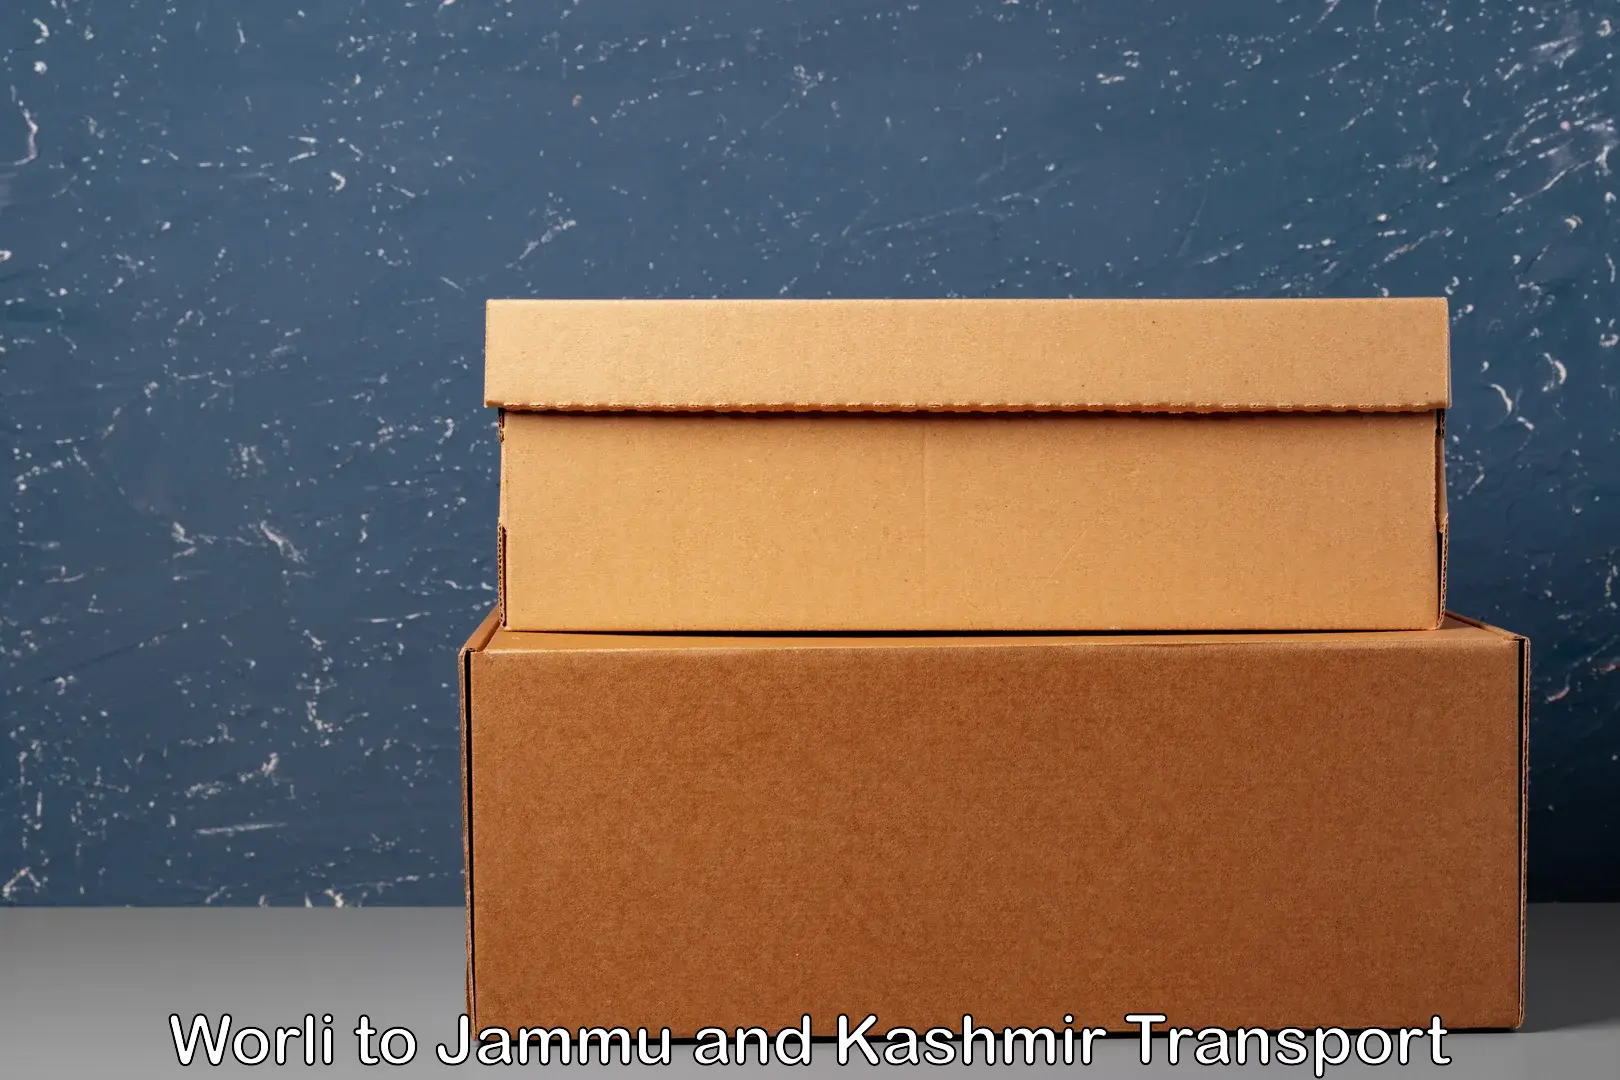 Shipping services Worli to Jammu and Kashmir